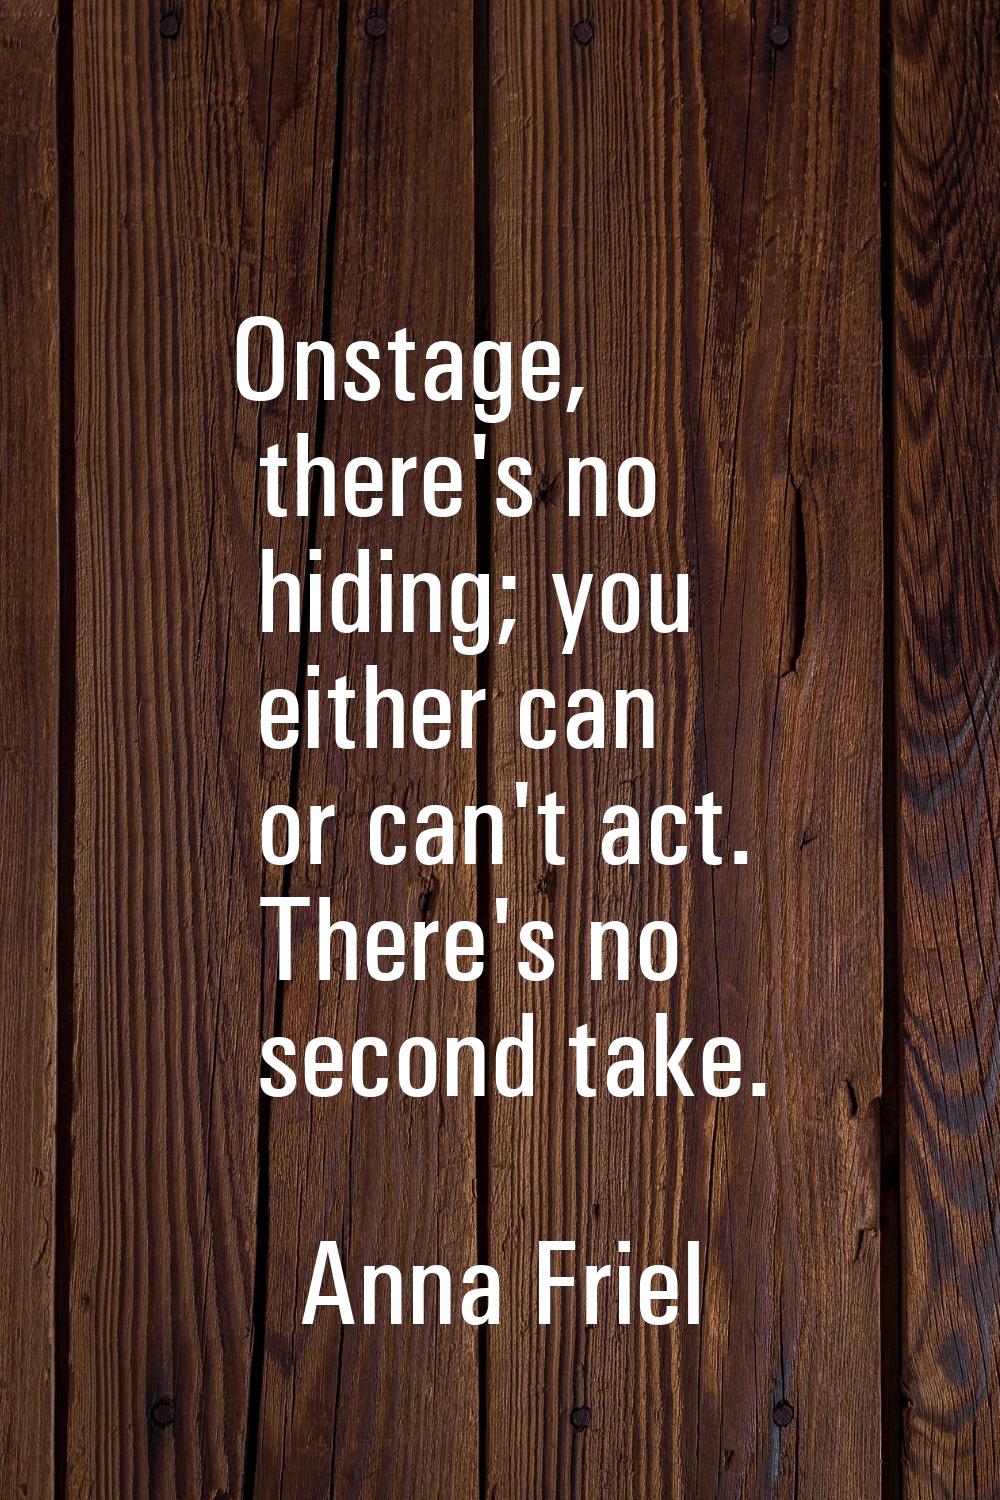 Onstage, there's no hiding; you either can or can't act. There's no second take.